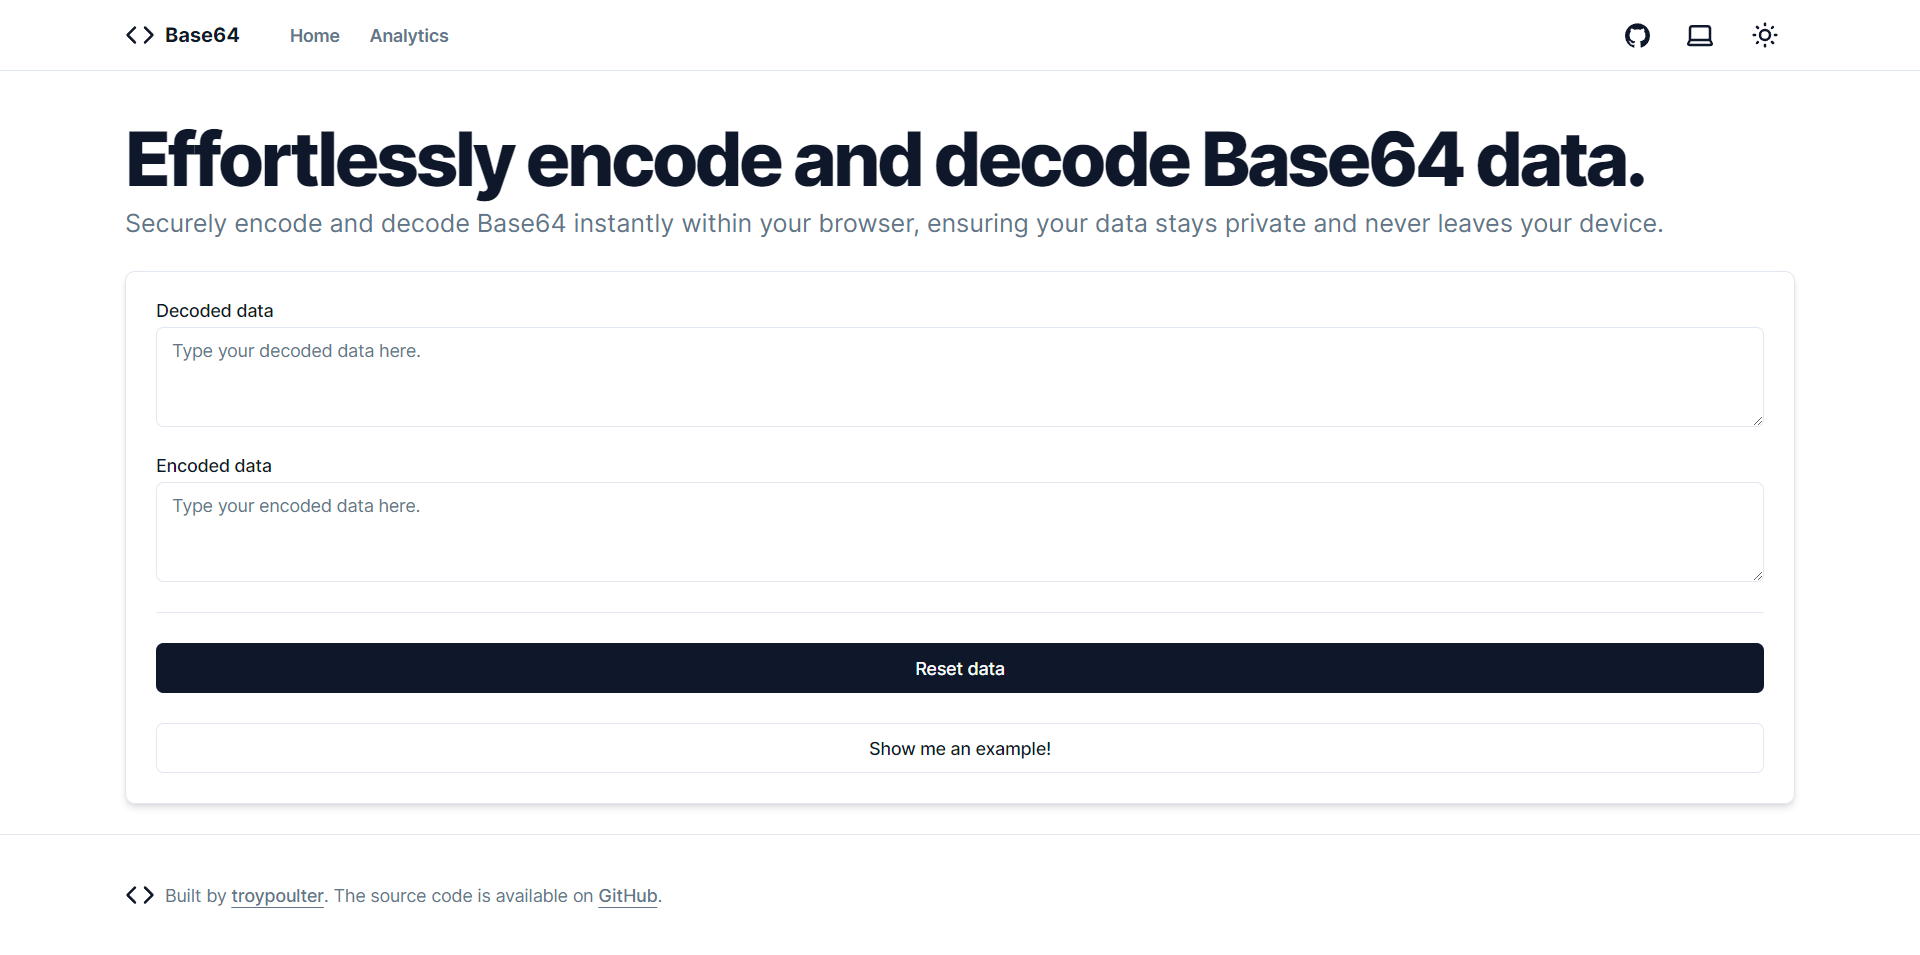 Why I built an Encode and Decode Base64 Web App